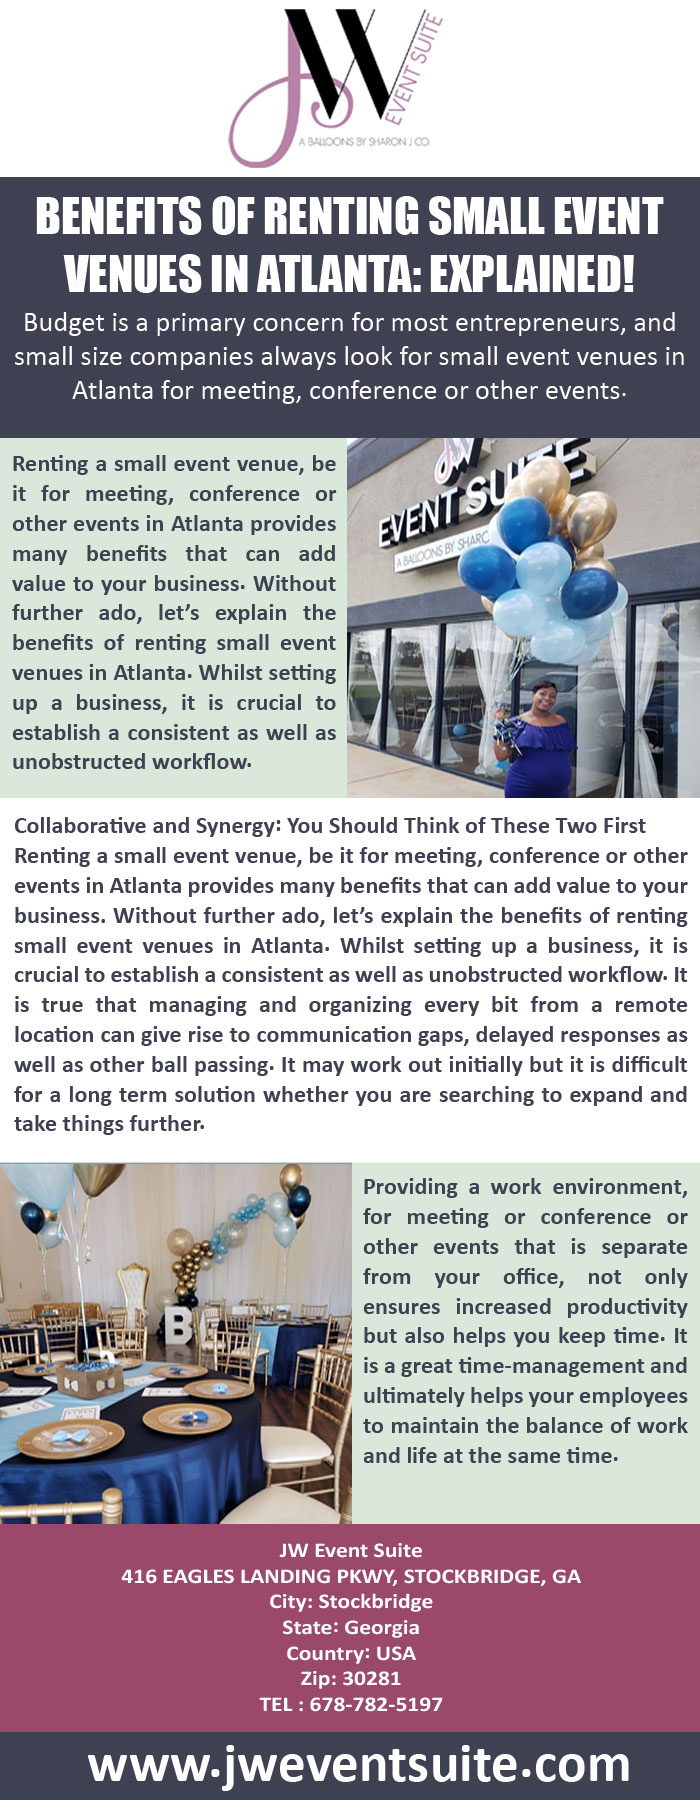  Benefits Of Renting Small Event Venues in Atlanta: Explained! Budget is a primary concern for most entrepreneurs, and small size companies always look for small event venues in Atlanta for meeting, conference or other events. Visit: https://bit.ly/37ZdJS3 by Jweventsuite